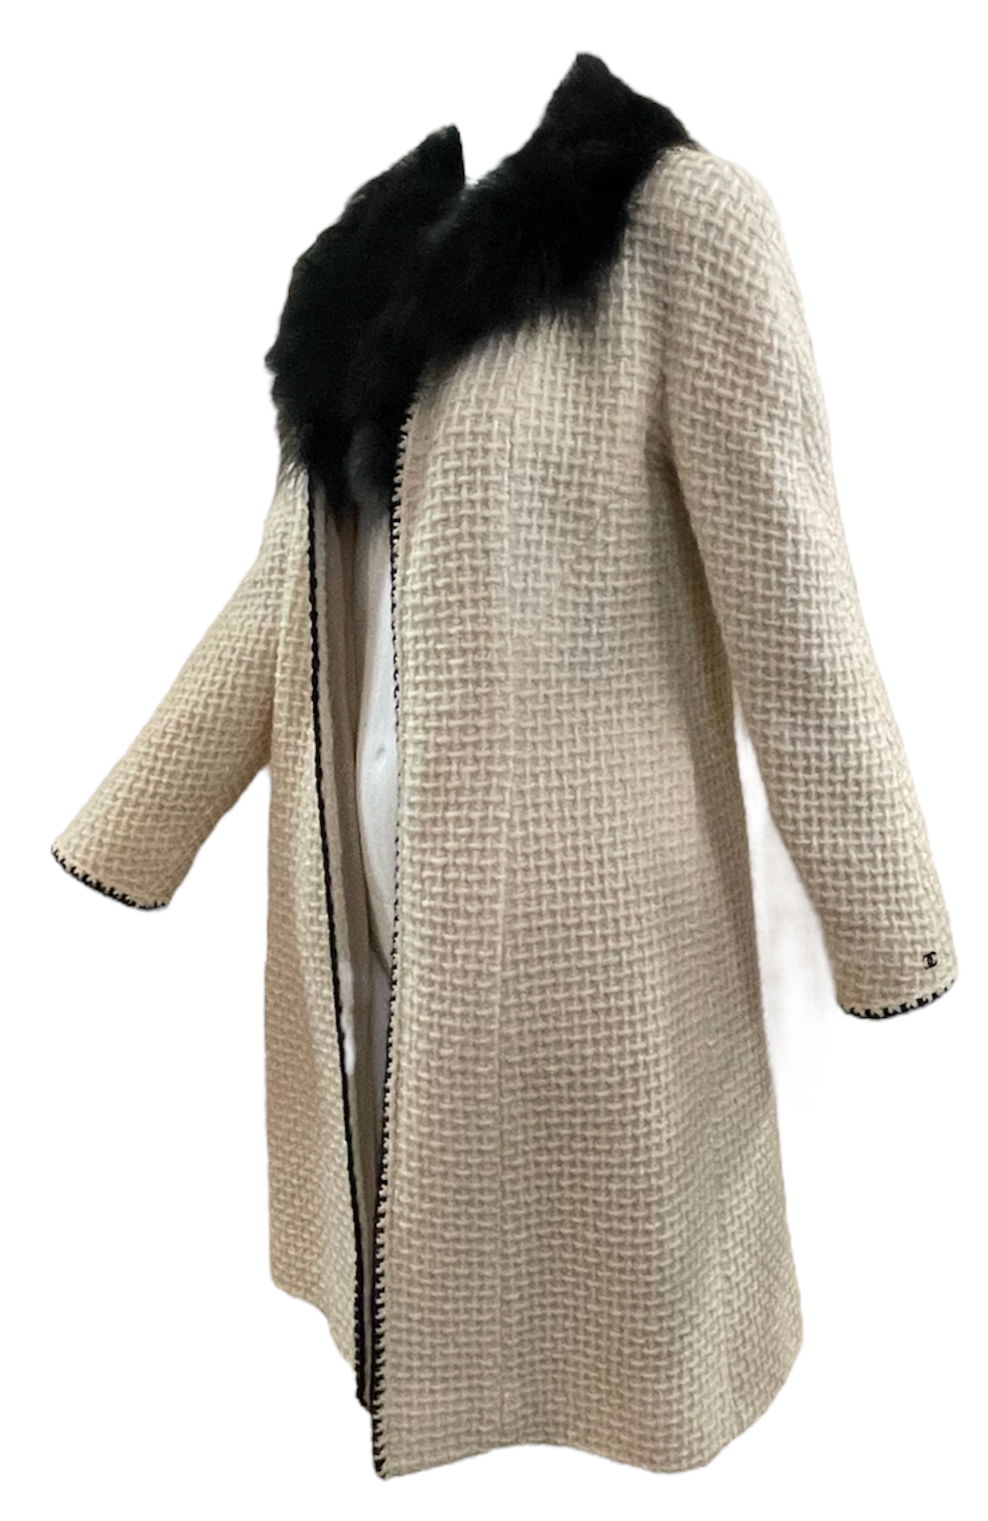  Chanel Contemporary White Wool Coat with Feathered Collar SIDE 2 of 5